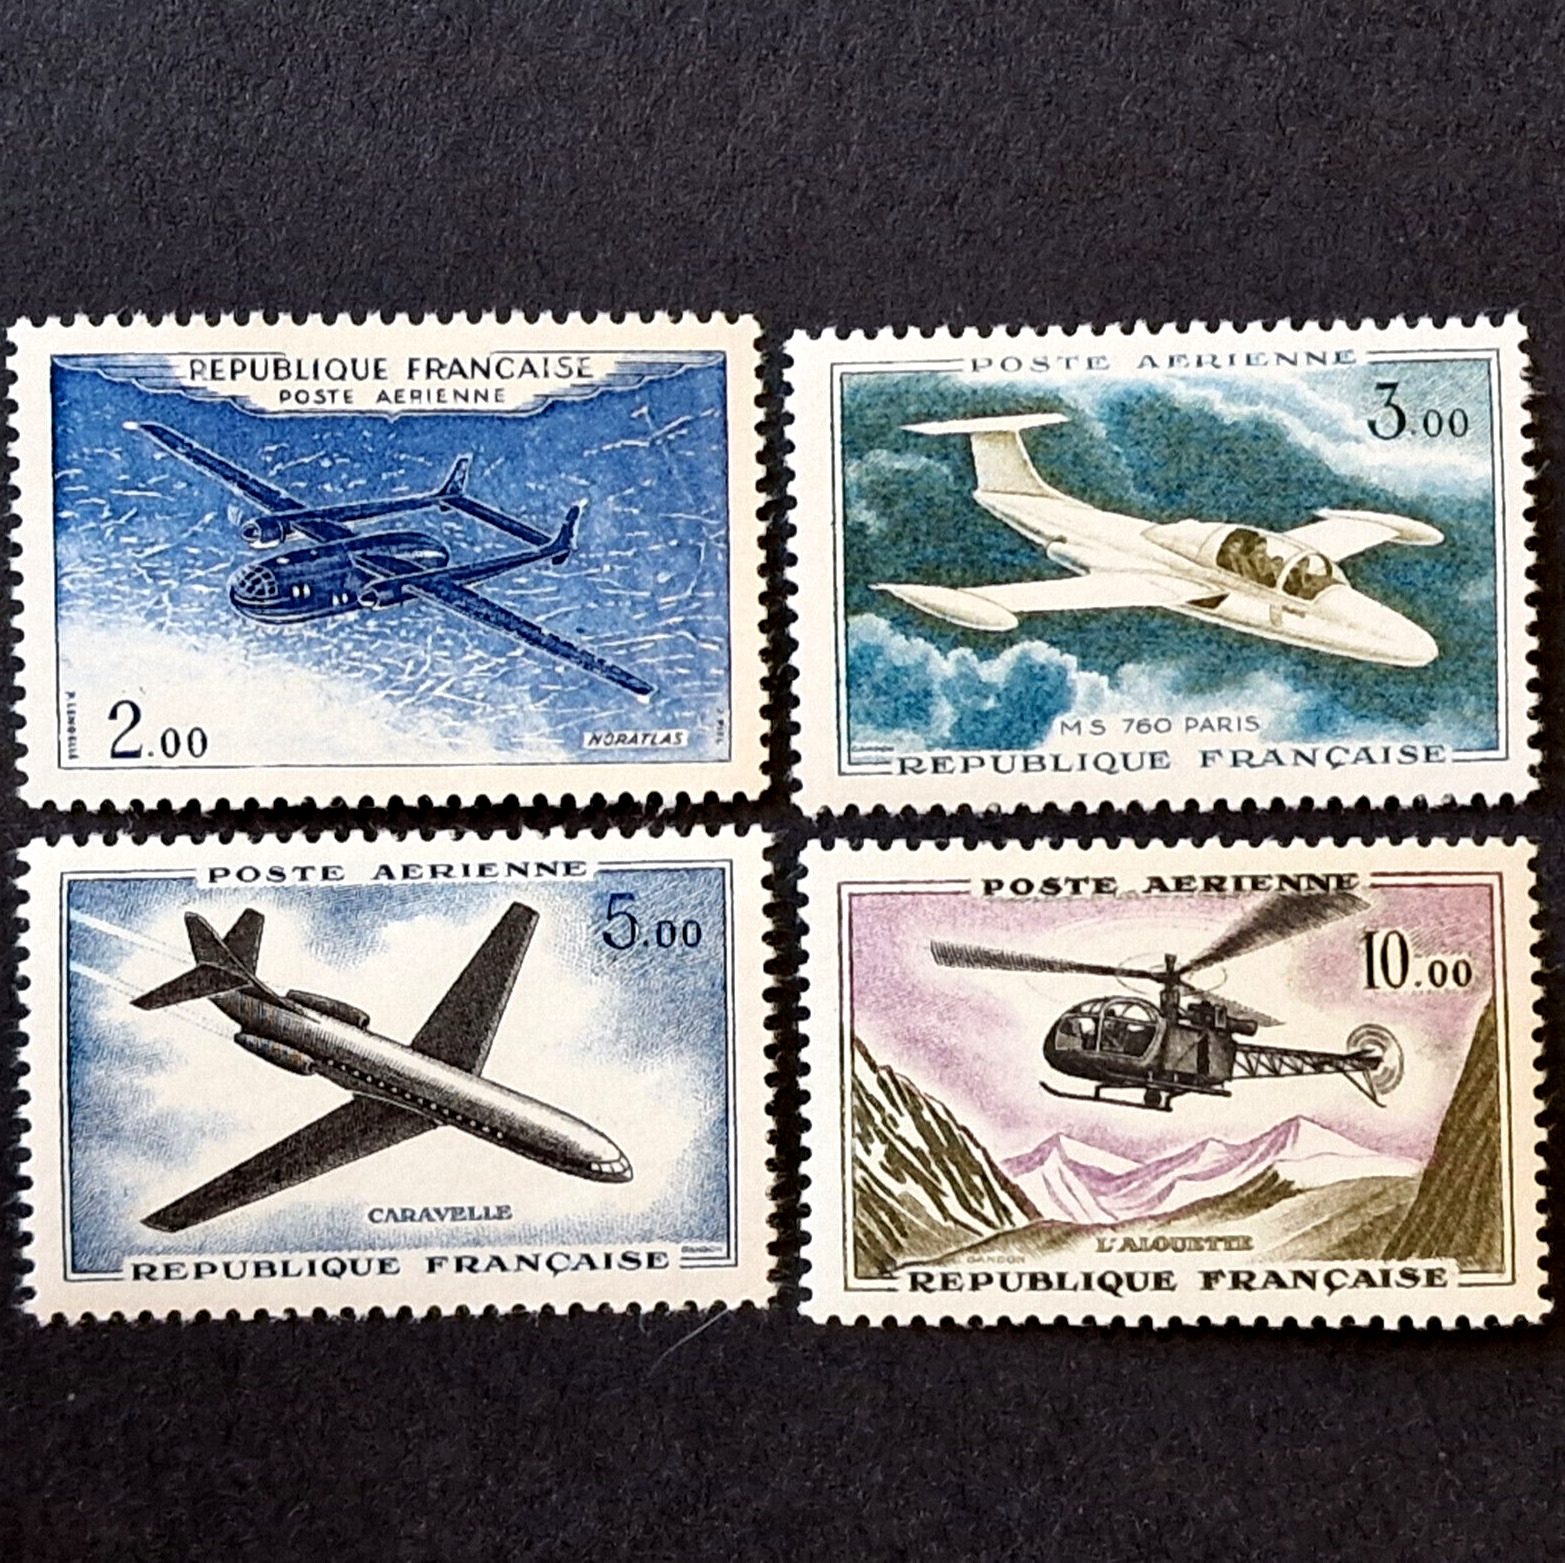 France 1960 - Air Mail - Planes - Aviation - 4 Stamps Full Set - Scott $19.45